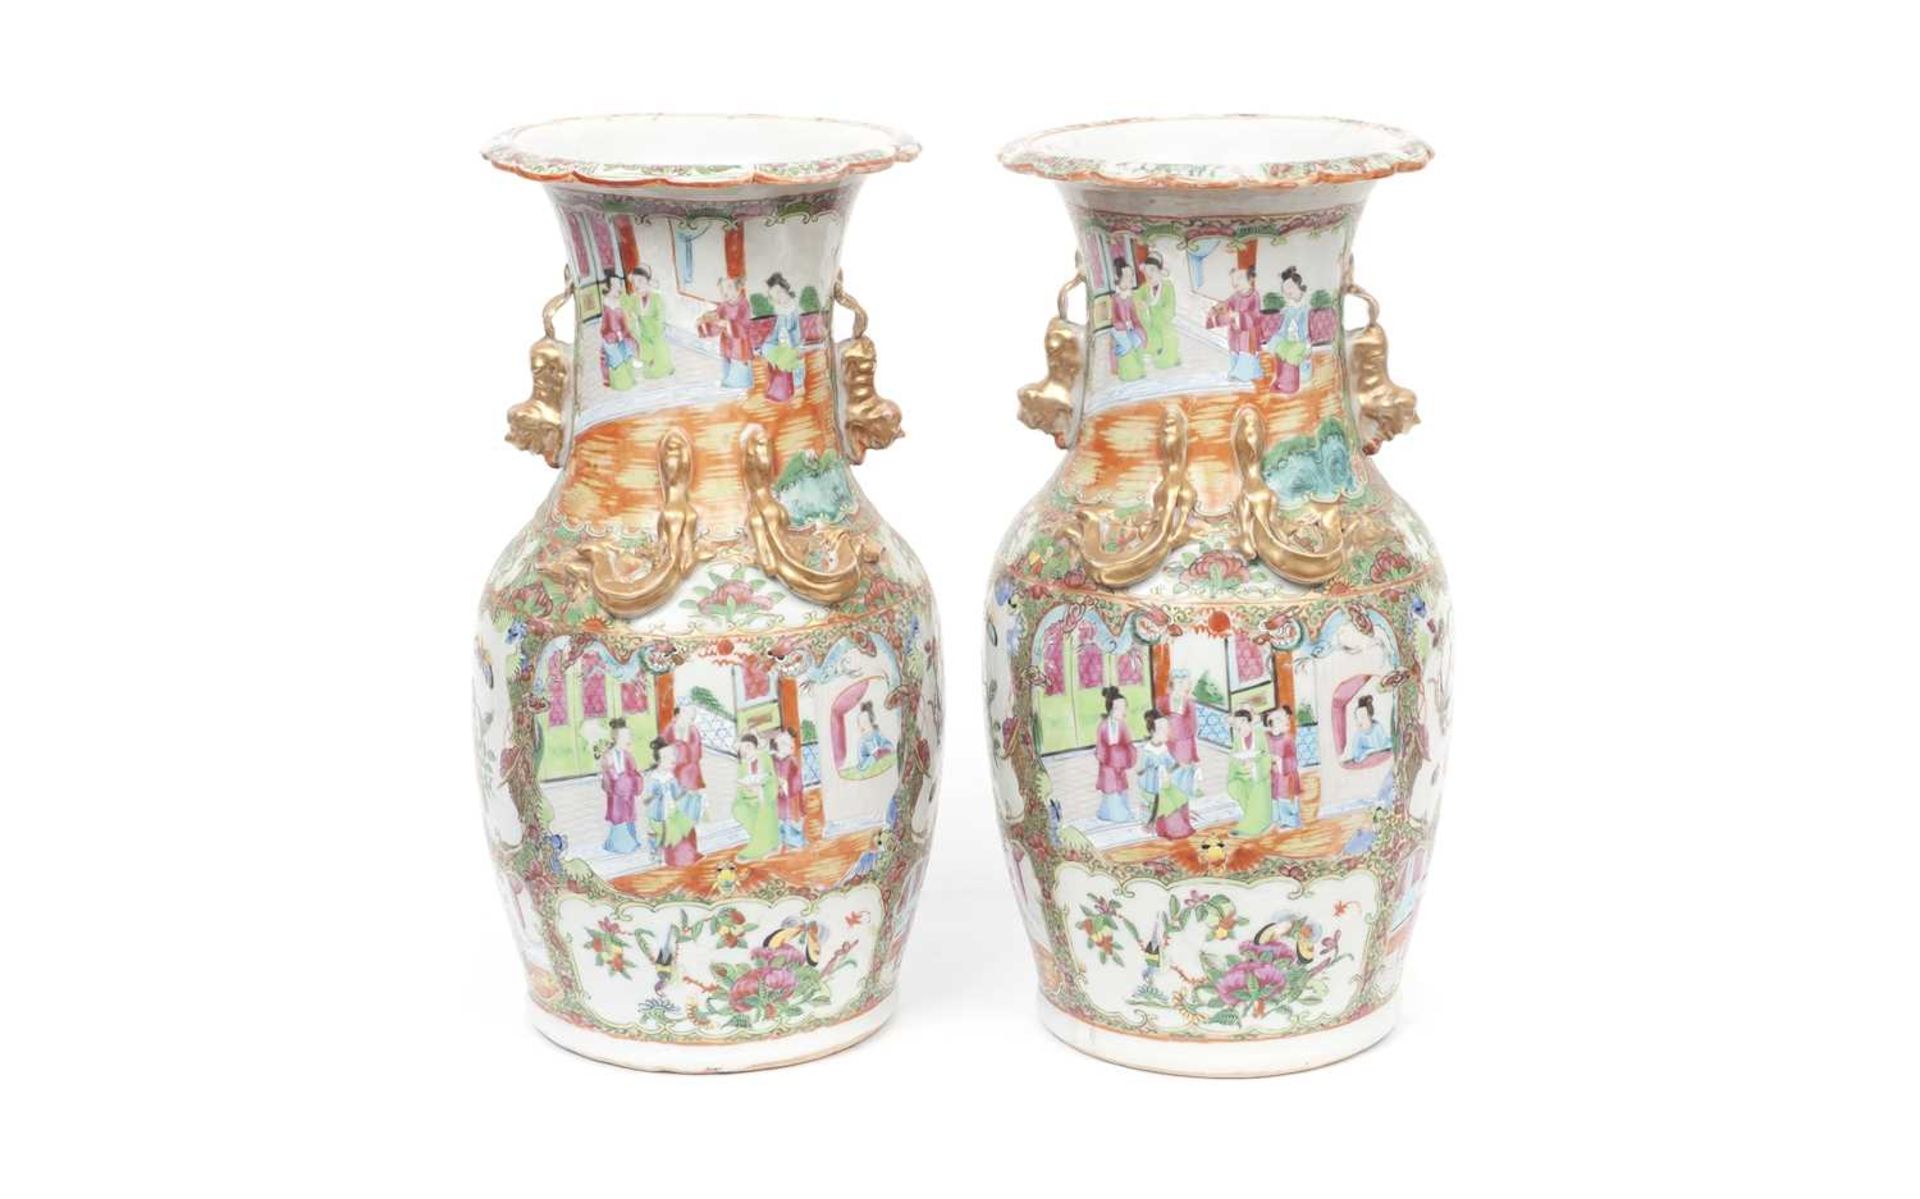 A PAIR OF LATE 19TH CENTURY CHINESE CANTON PORCELAIN VASES